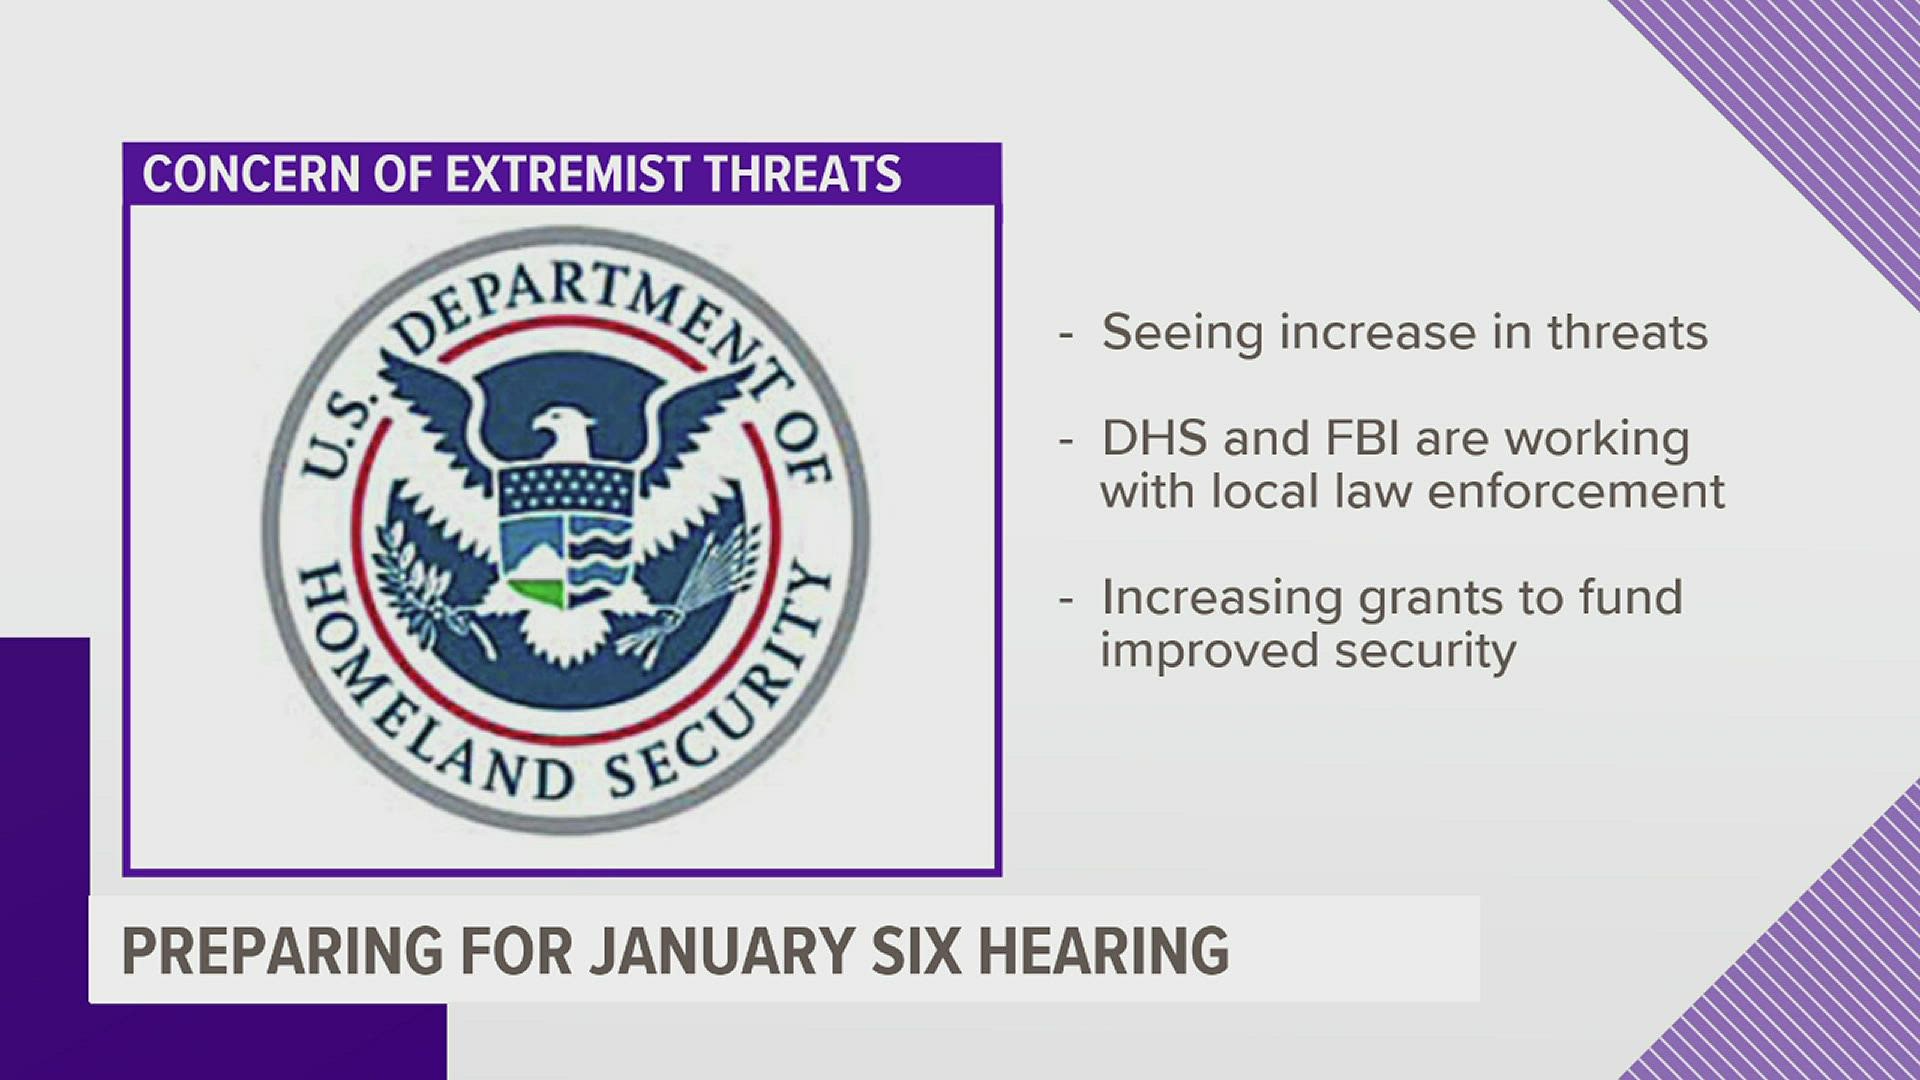 Domestic violent extremists present the most pressing threat, the Department of Homeland Security said, citing the May 14 racist attack in Buffalo as an example.